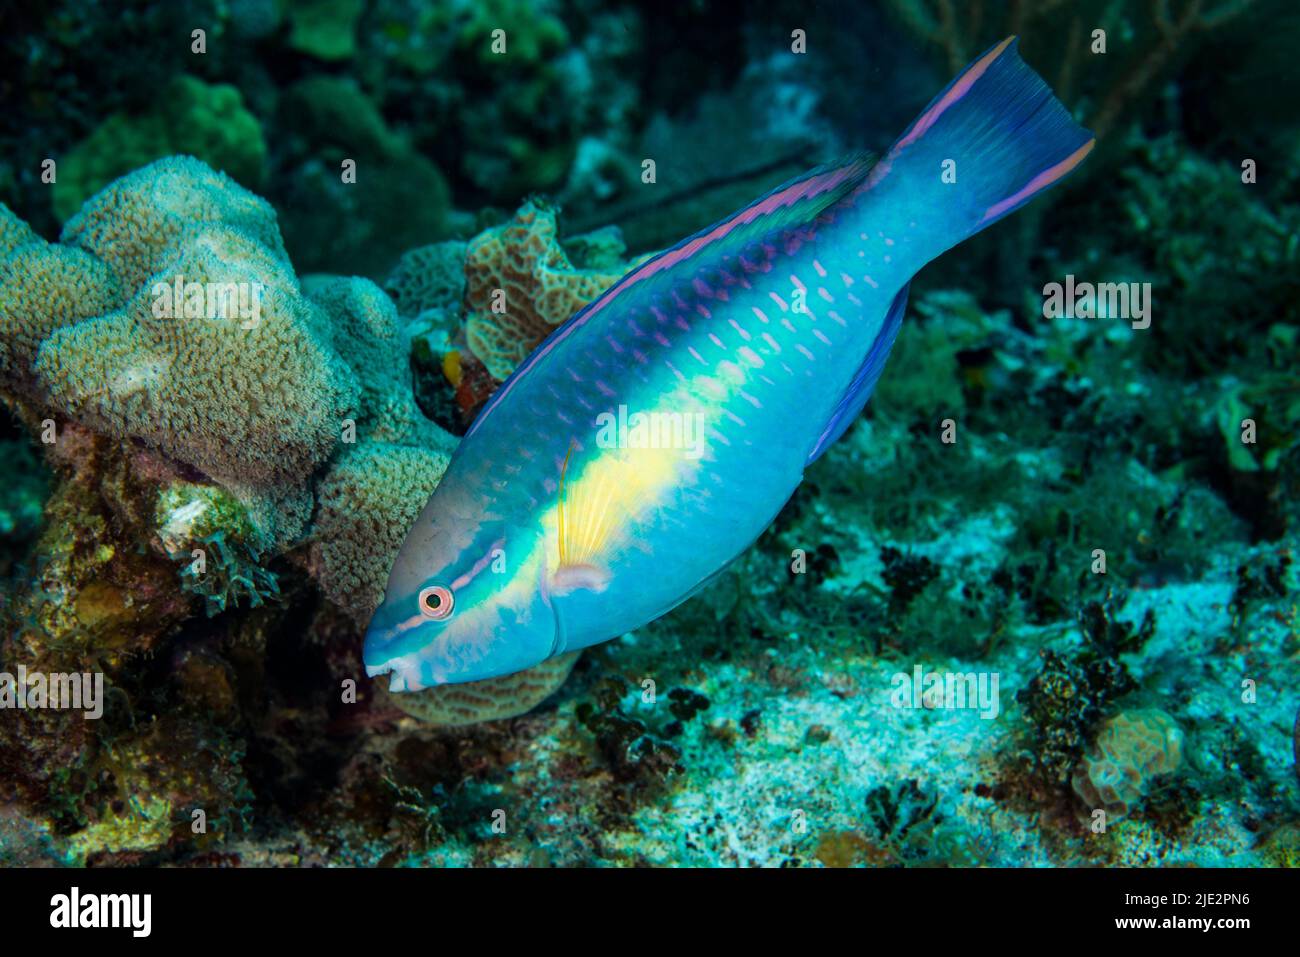 Princess Parrotfish swimming over coral reef at Little Cayman Island in the Caribbean Stock Photo